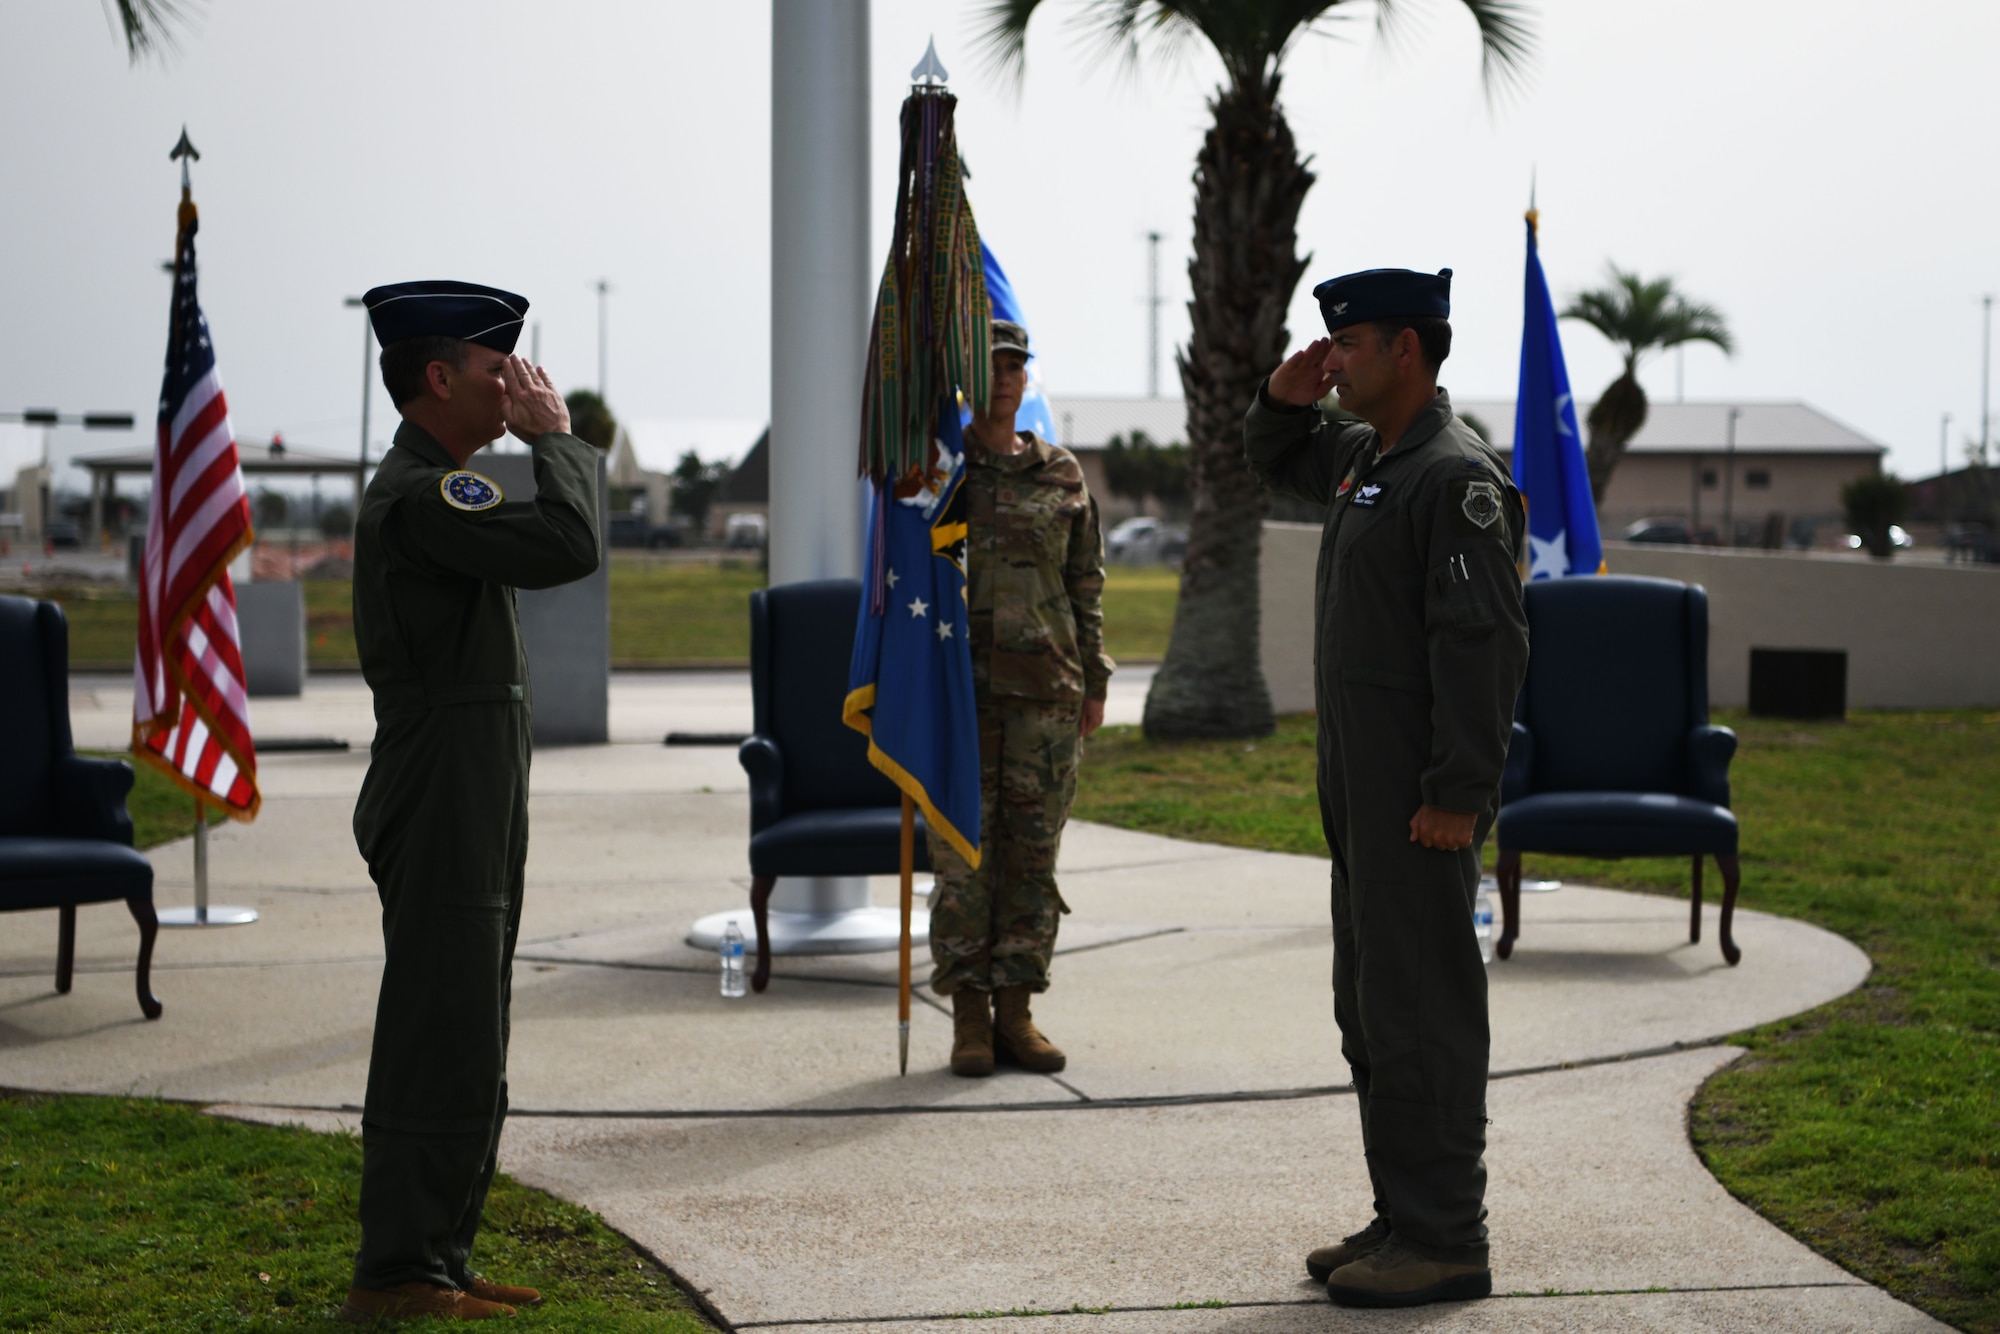 U.S. Air Force Col. Greg Moseley assumes command of the 325th Fighter Wing from U.S. Air Force Maj. Gen. Chad Franks, Ninth Air Force commander, during a change of command ceremony at Tyndall Air Force Base, Florida, June 26, 2020. As the 325th FW commander, Moseley will oversee F-22 Raptor pilot training as well as the continued rebuild of the base following the damage done by Hurricane Michael in 2018. (U.S. Air Force photo by Tech. Sgt. Clayton Lenhardt)